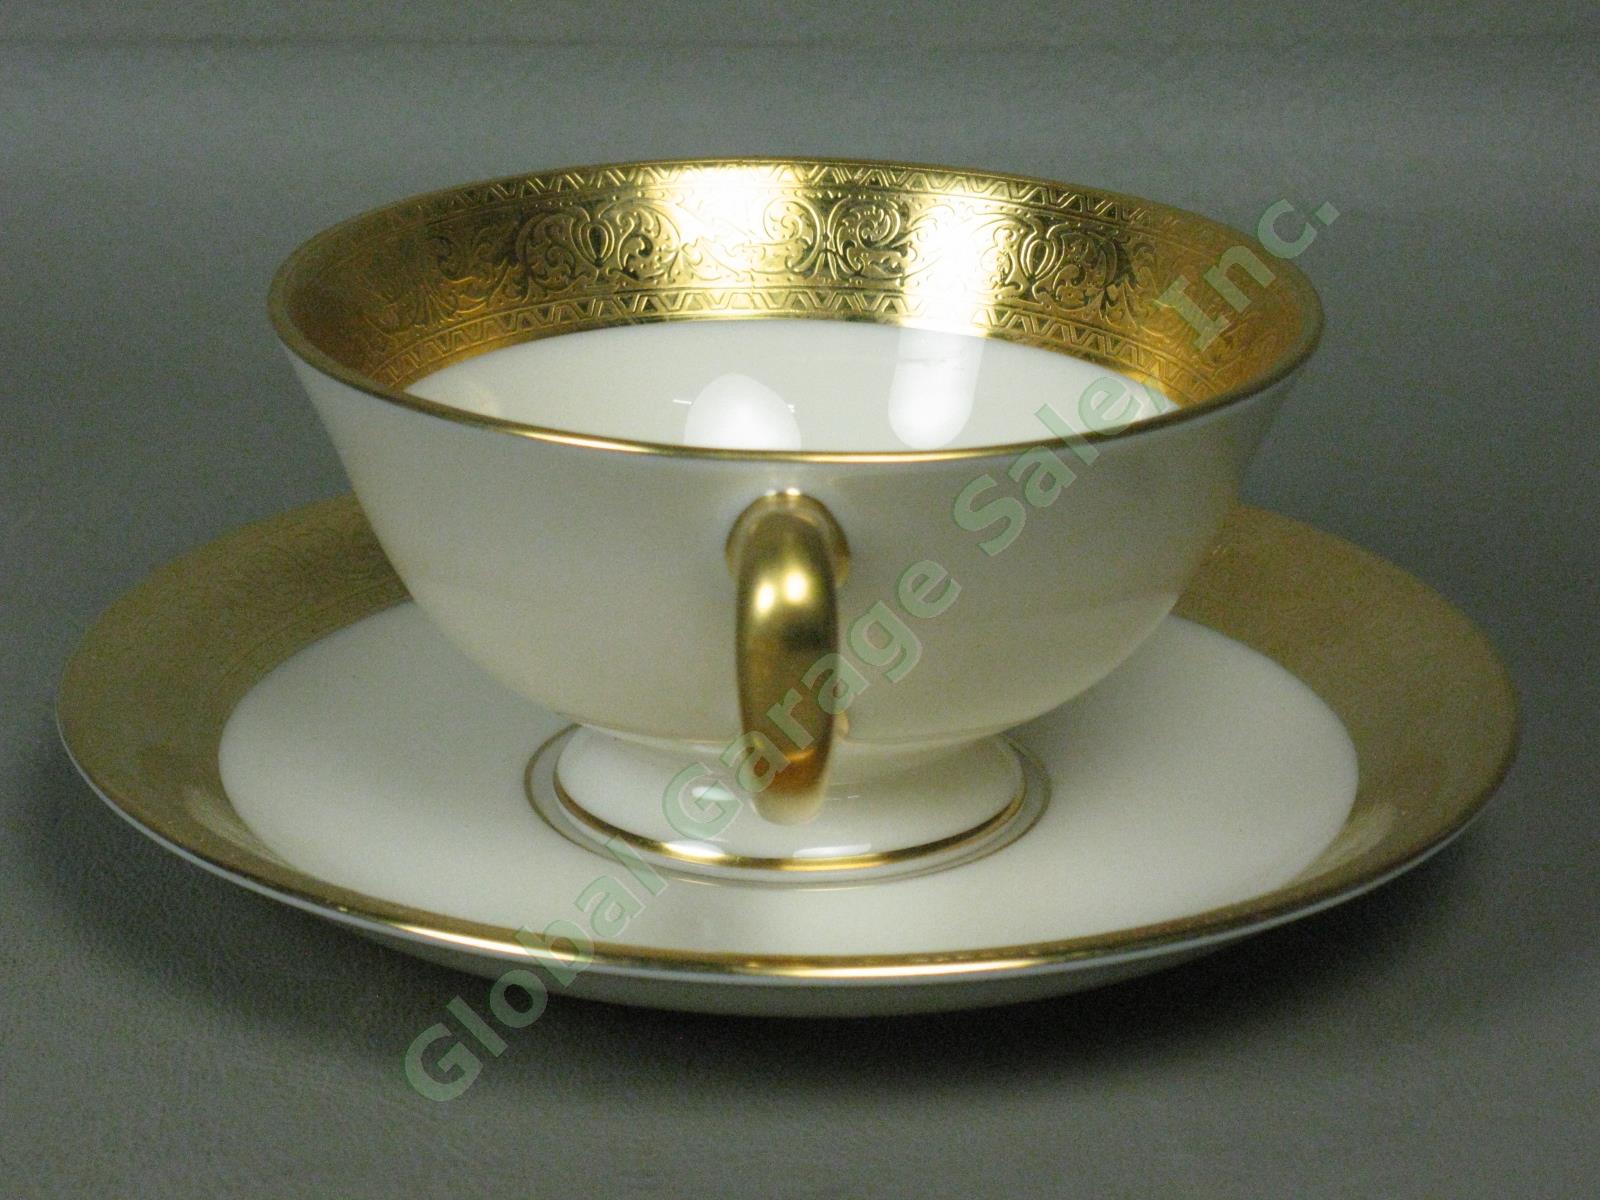 4 Lenox Westchester China M139 Presidential Gold Encrusted Tea Cup Saucer Set NR 2